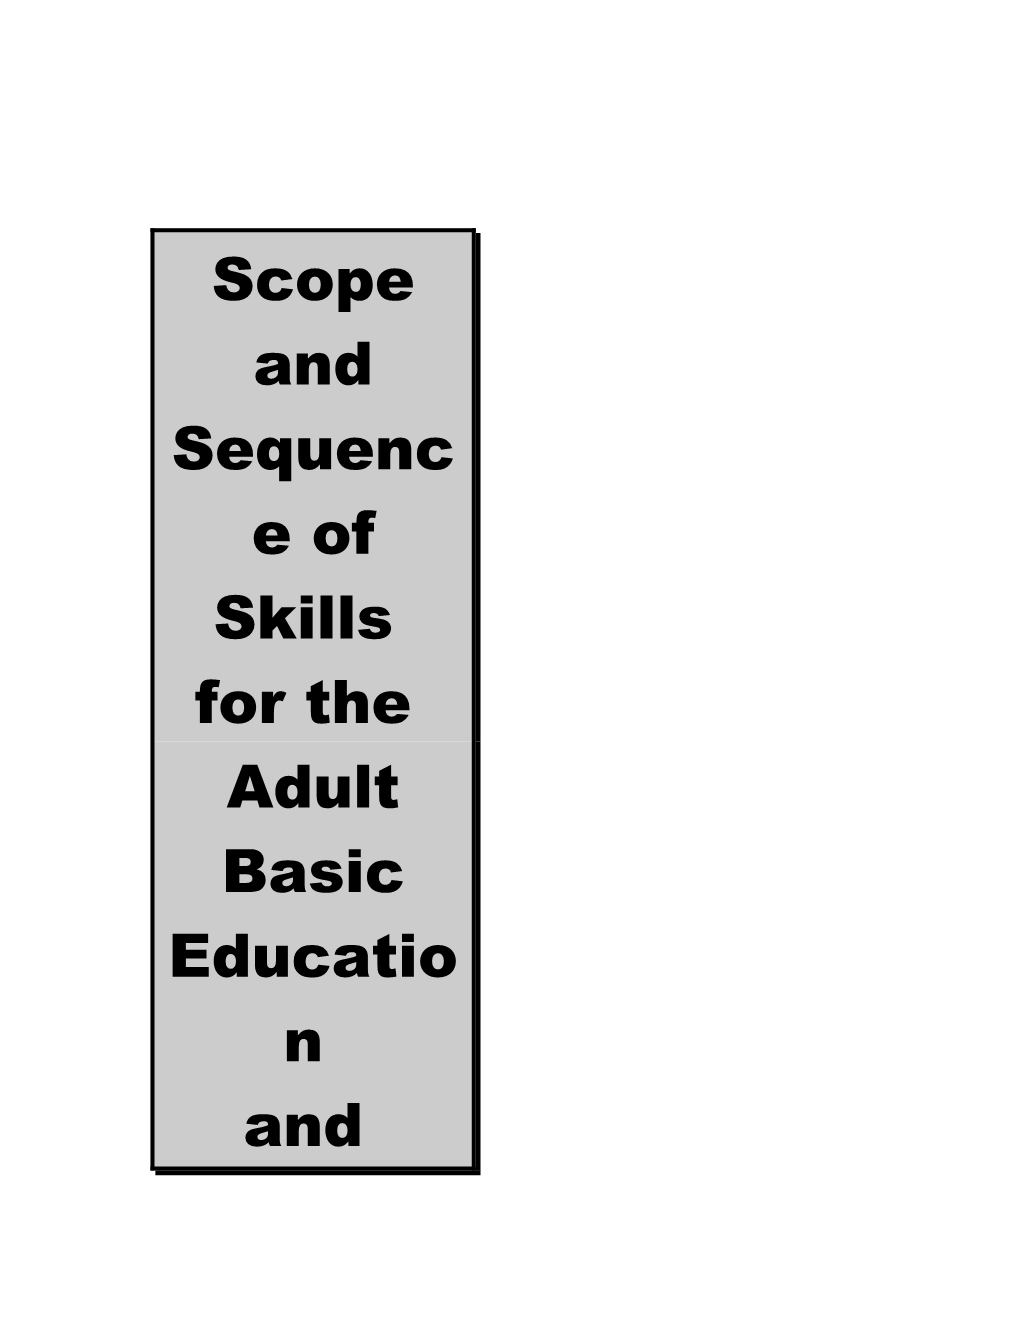 Scope and Sequence of Skills